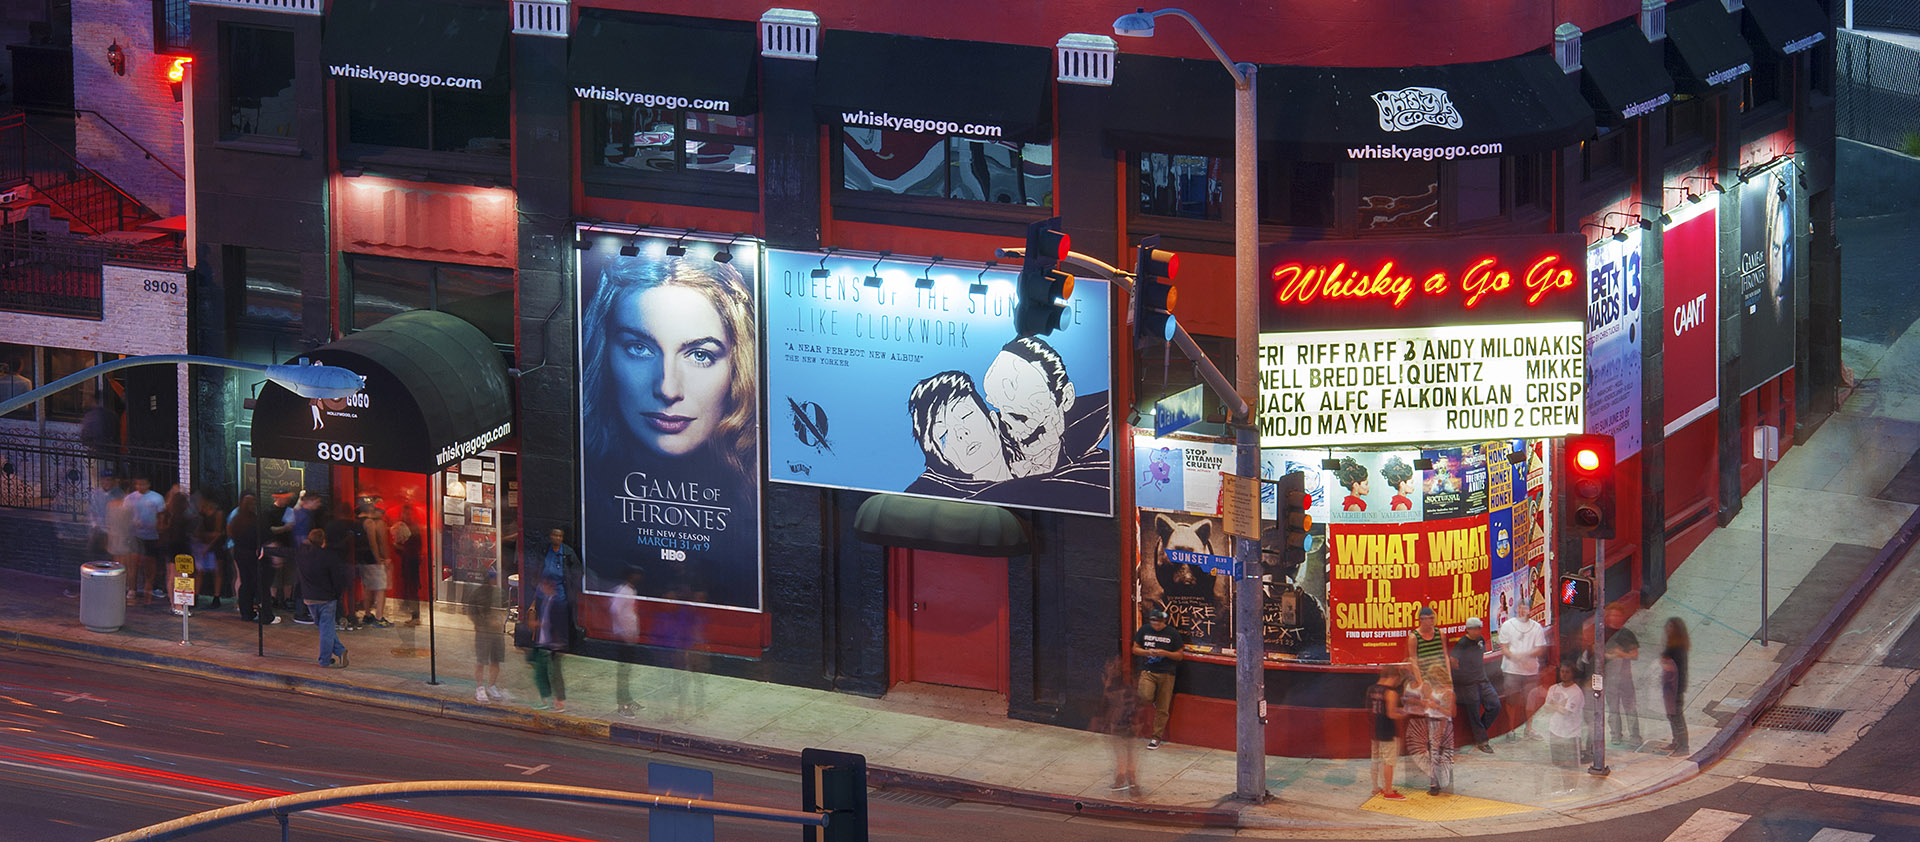 Whisky A Go Go The First Real American Discotheque Visit West Hollywood